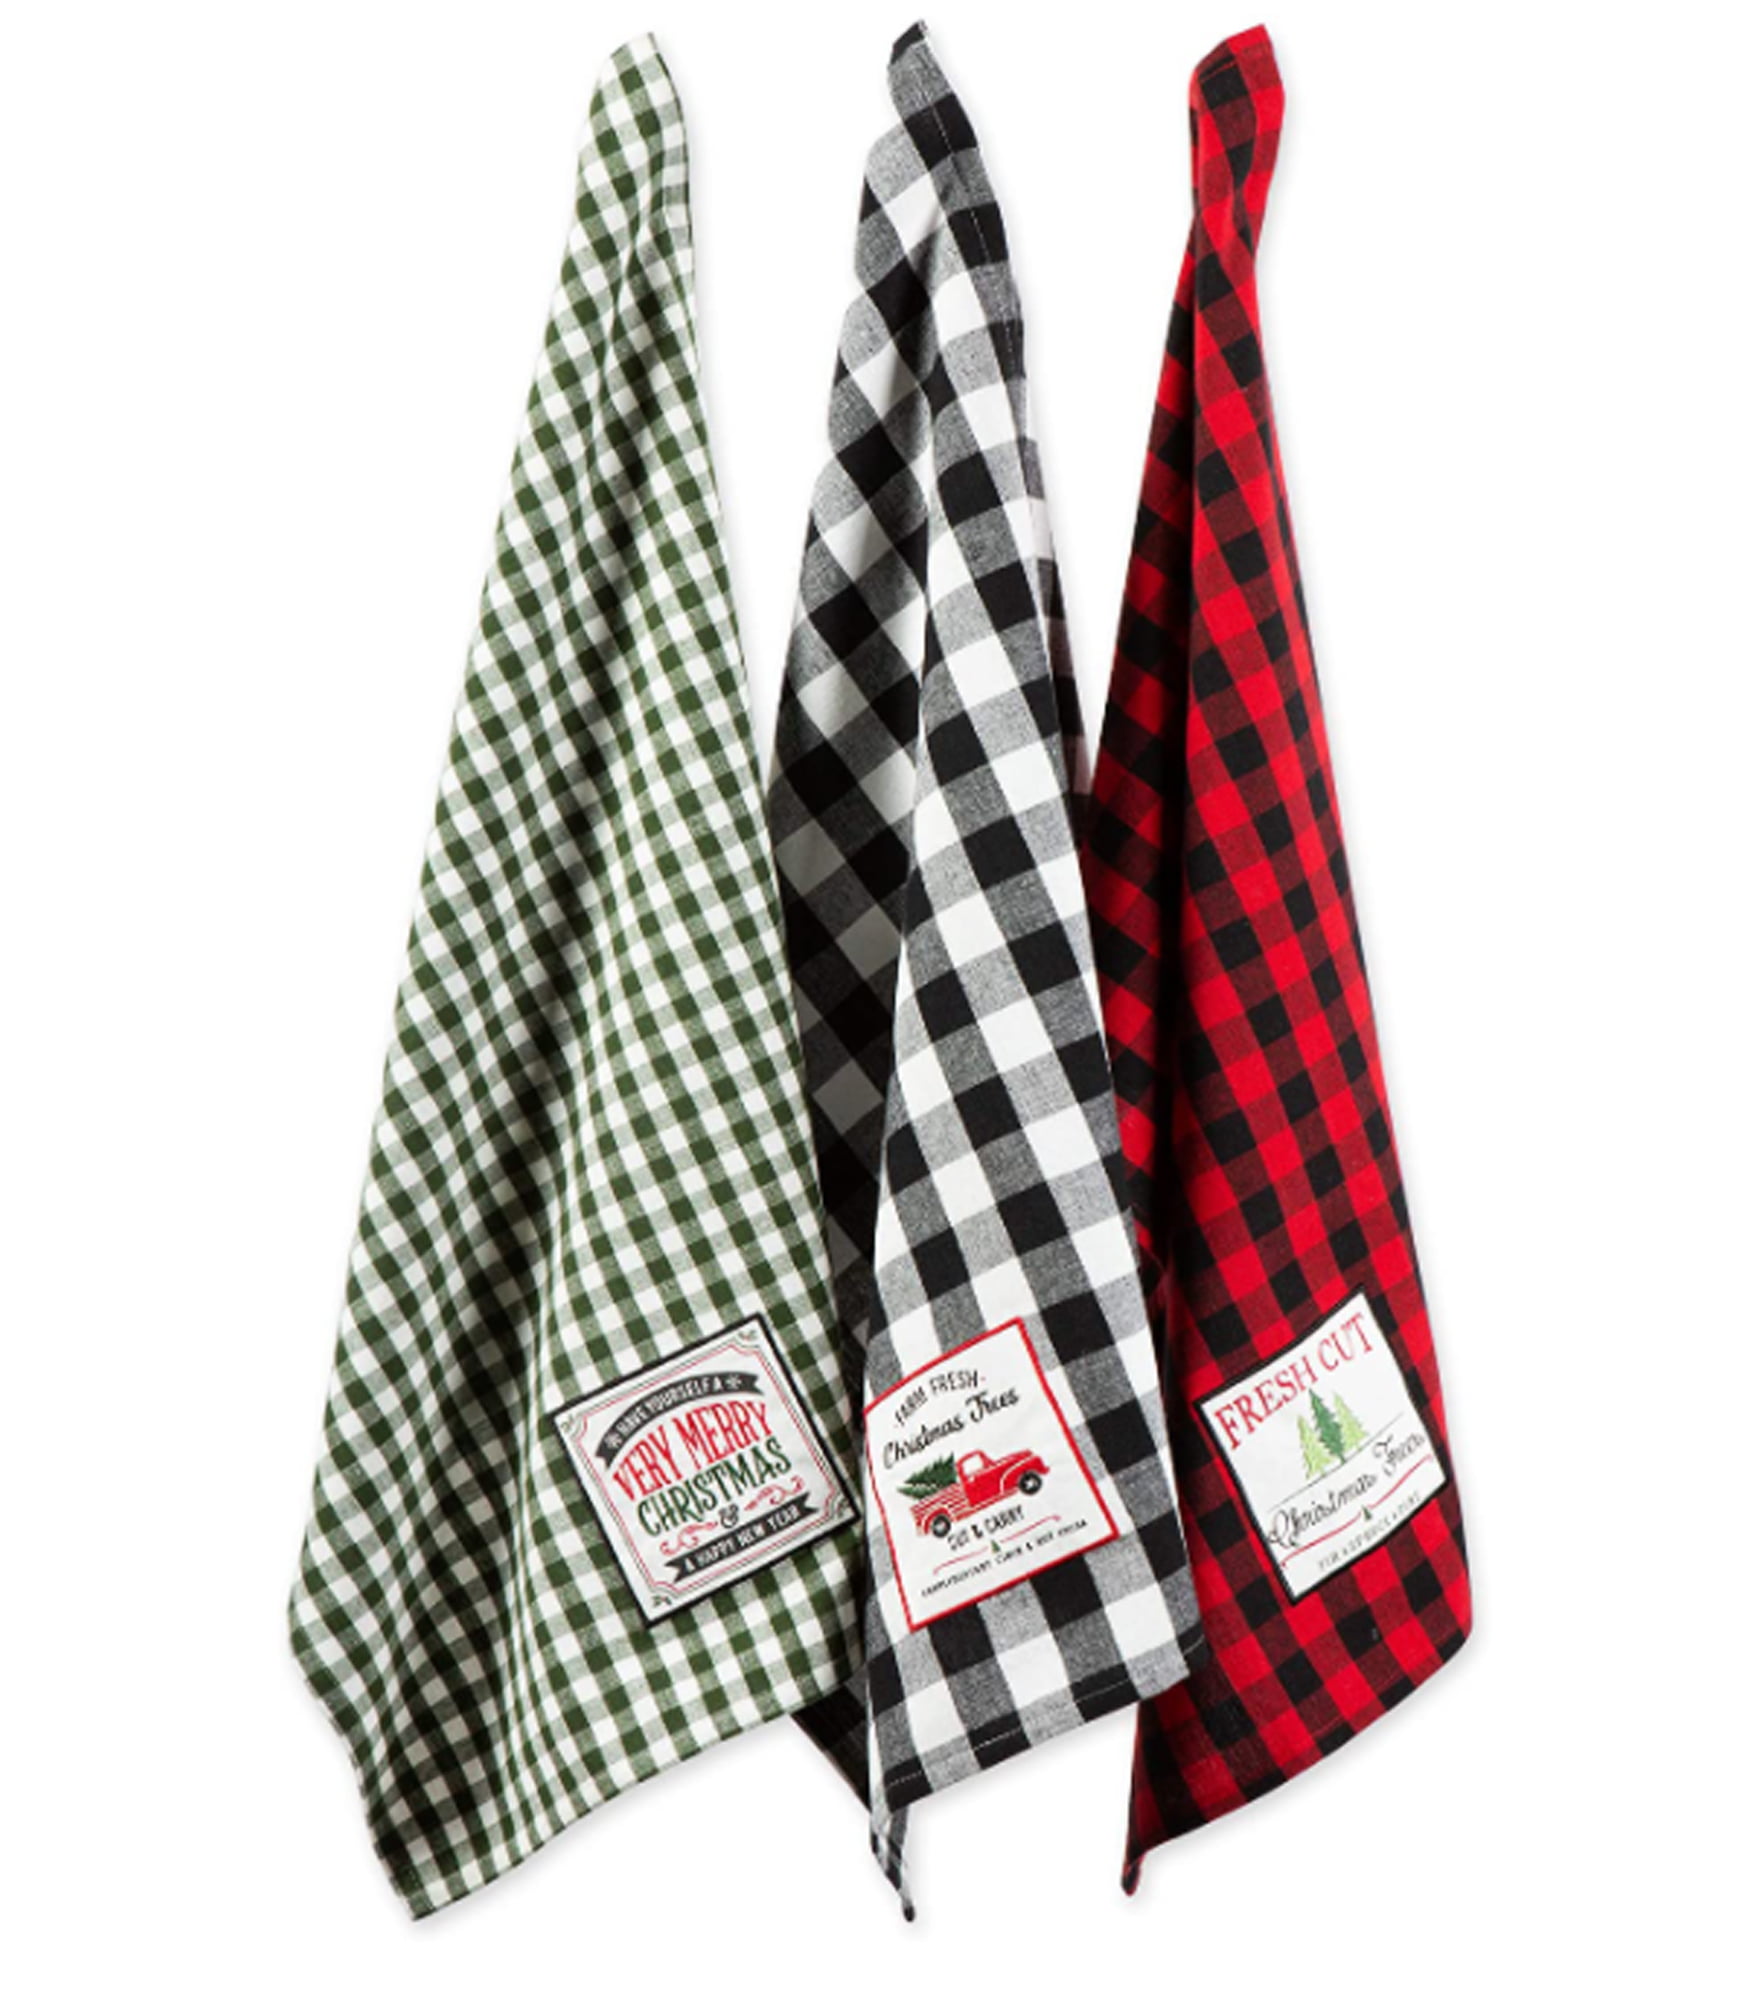 Luxury Kitchen Towel Red And White Plaid Modern Country Quality Cotton New  28”